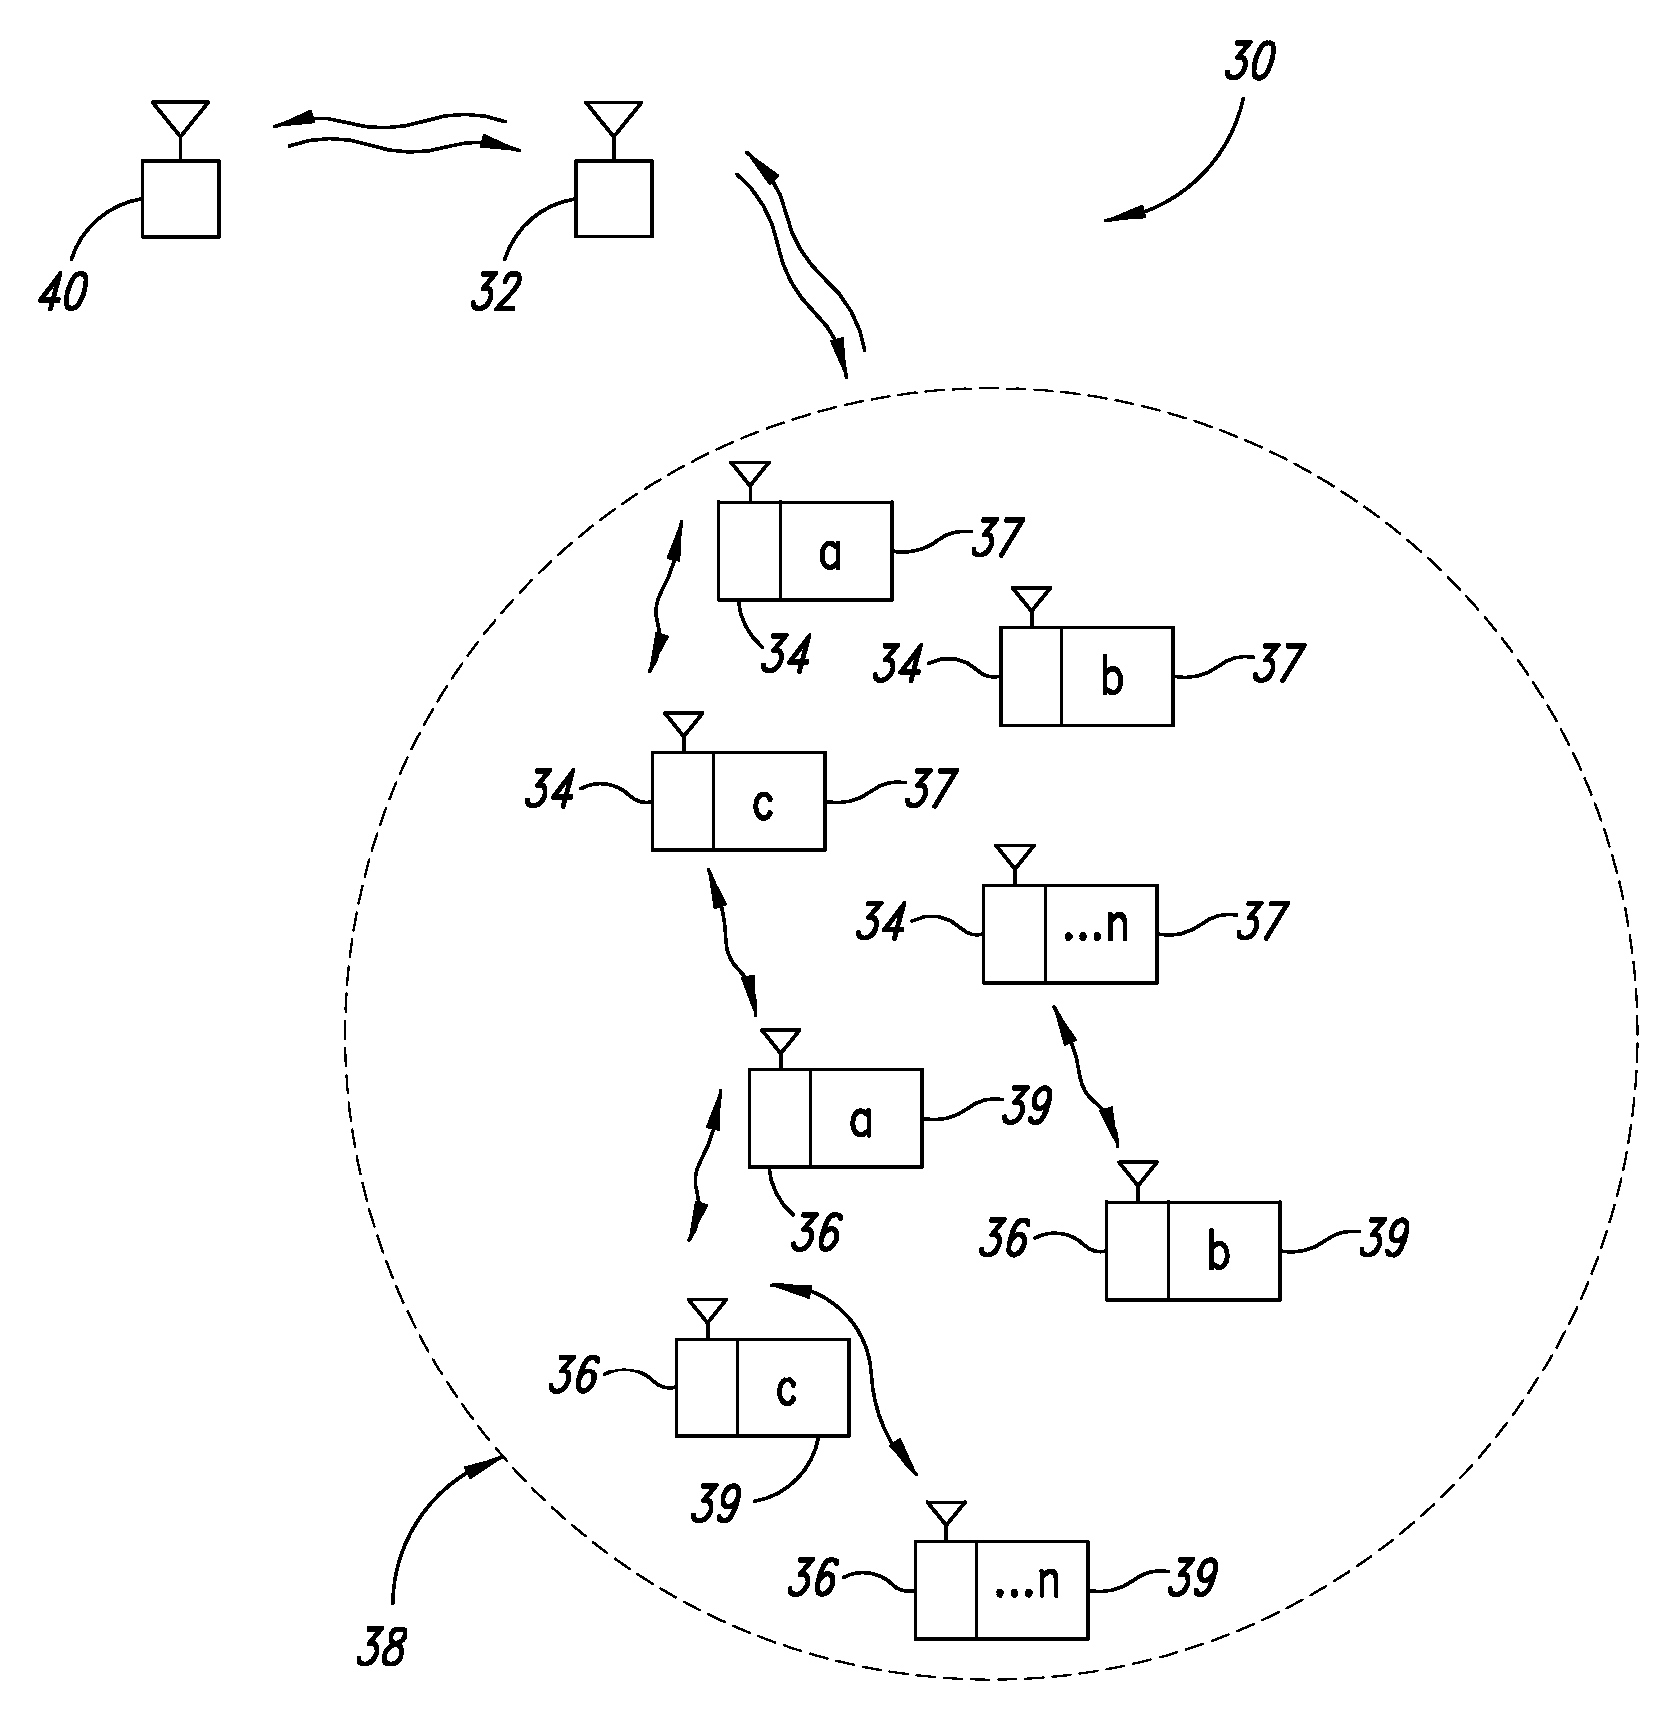 System and method for inventorying multiple remote objects